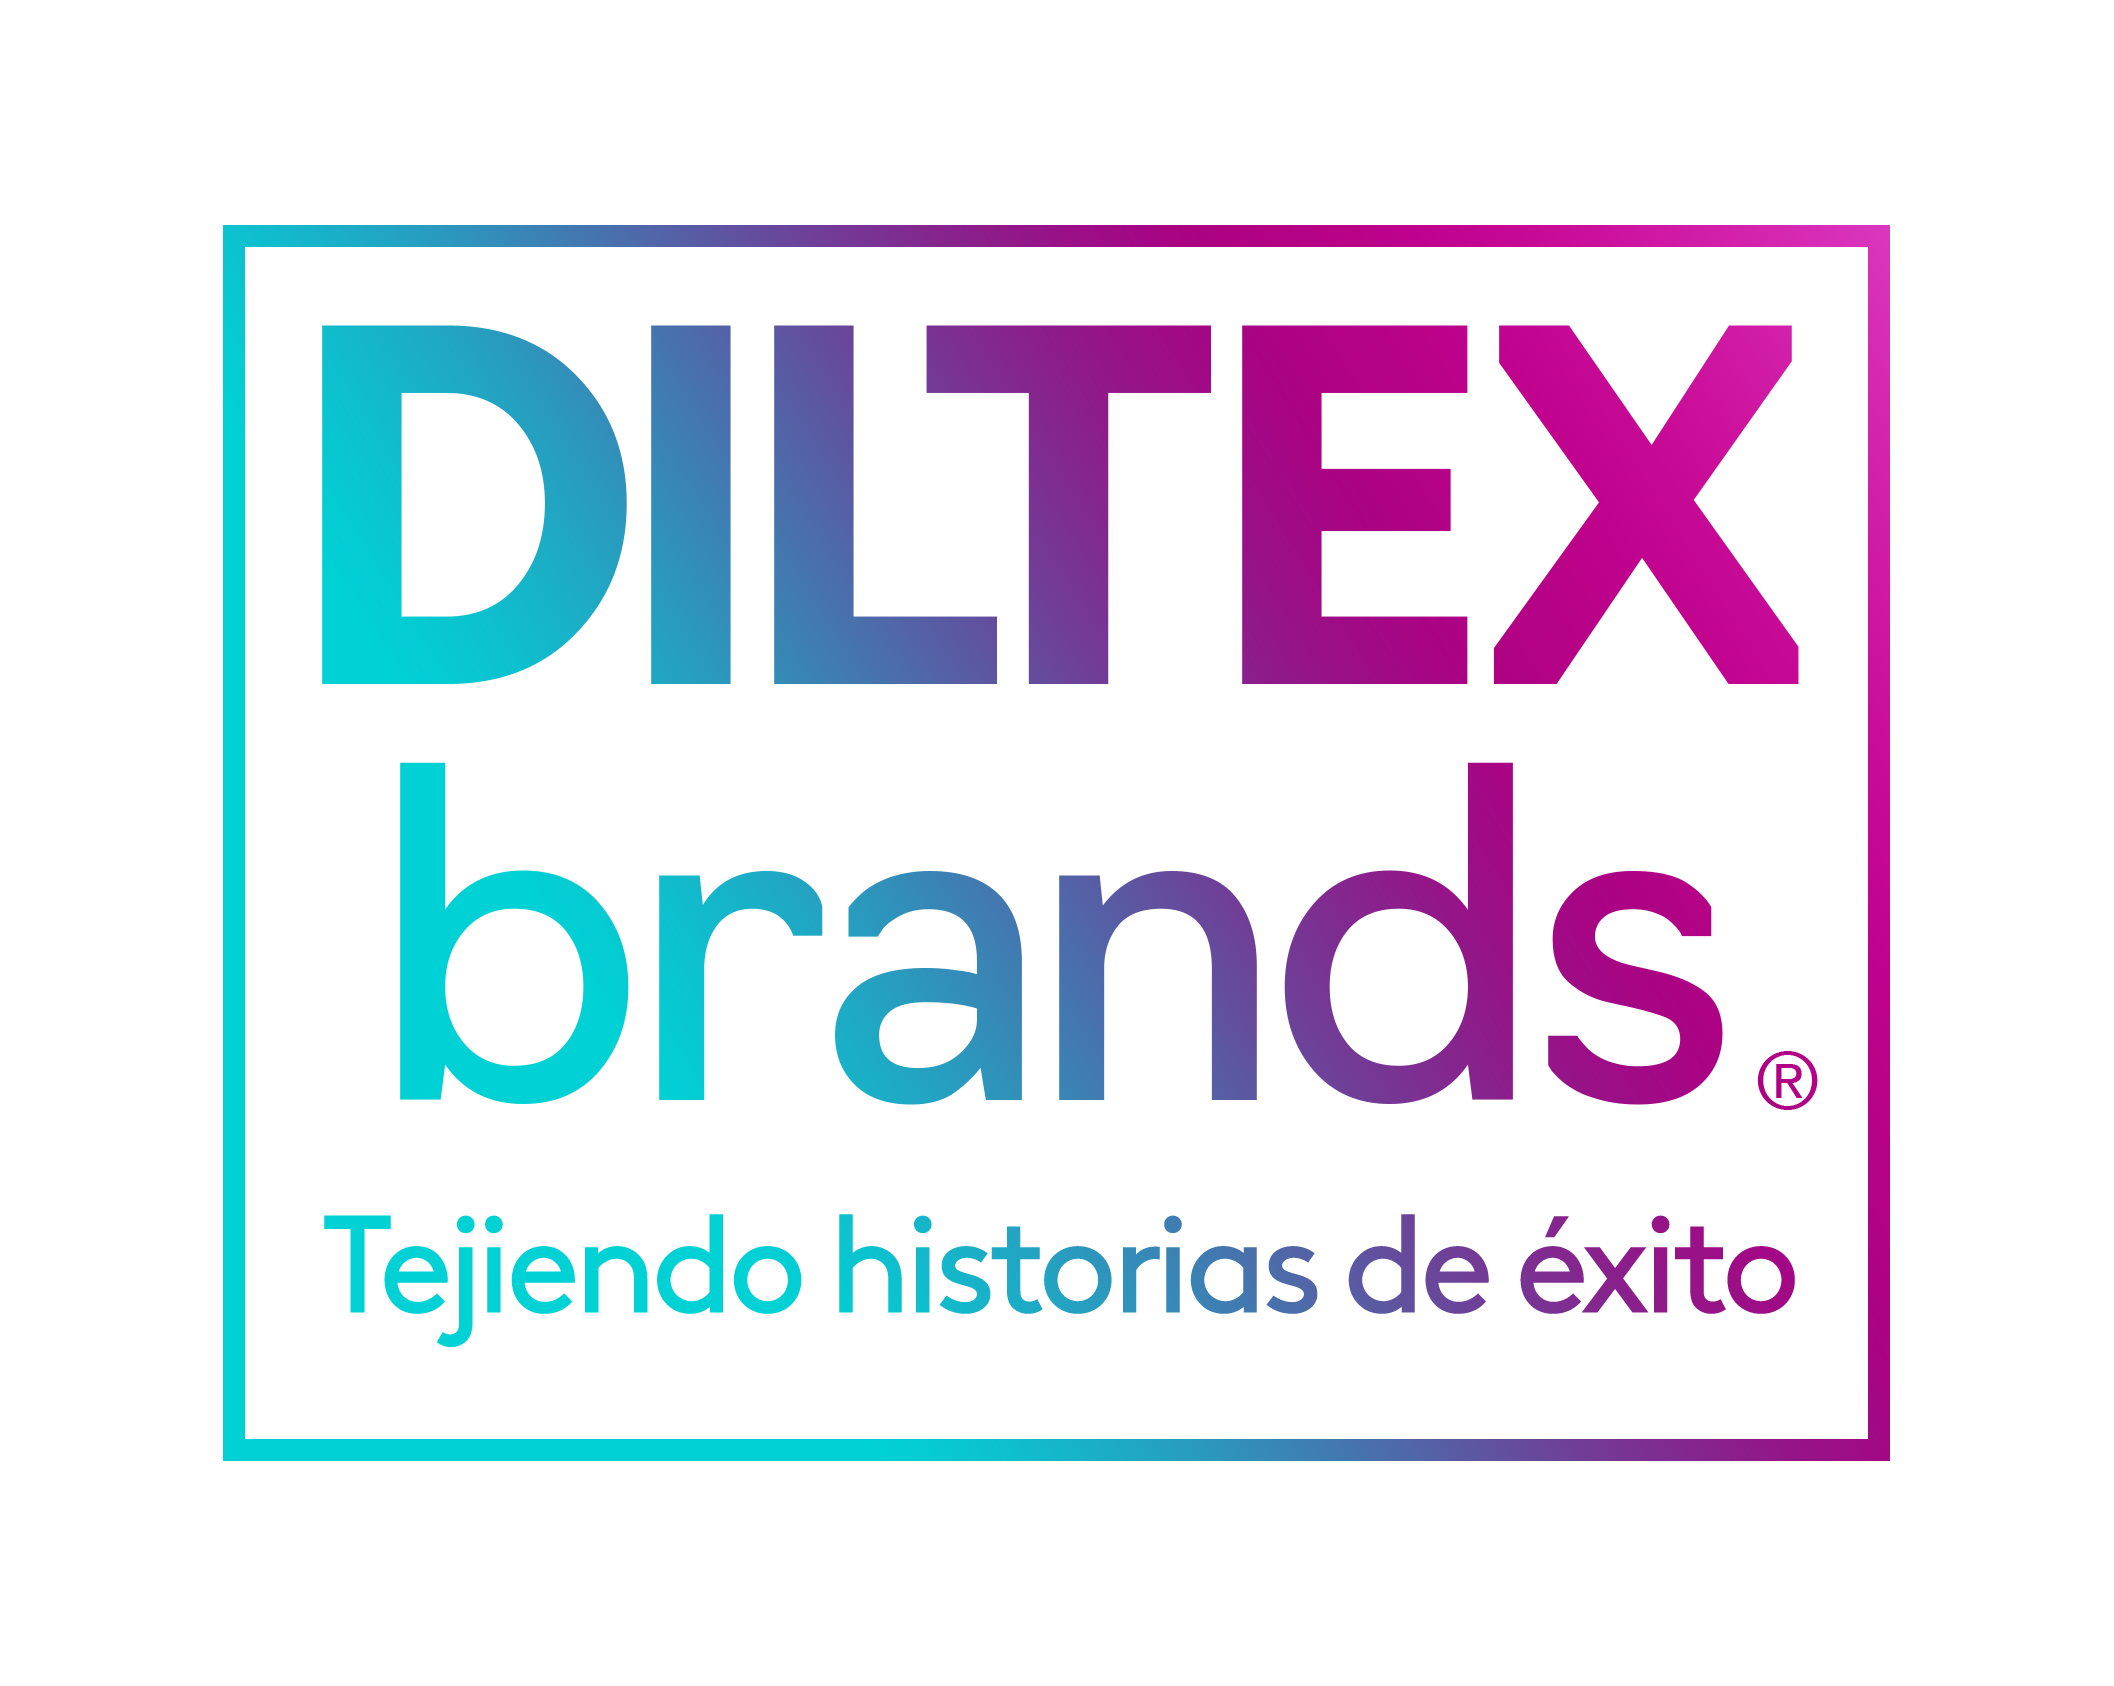 Fruit of the Loom - Diltex brands